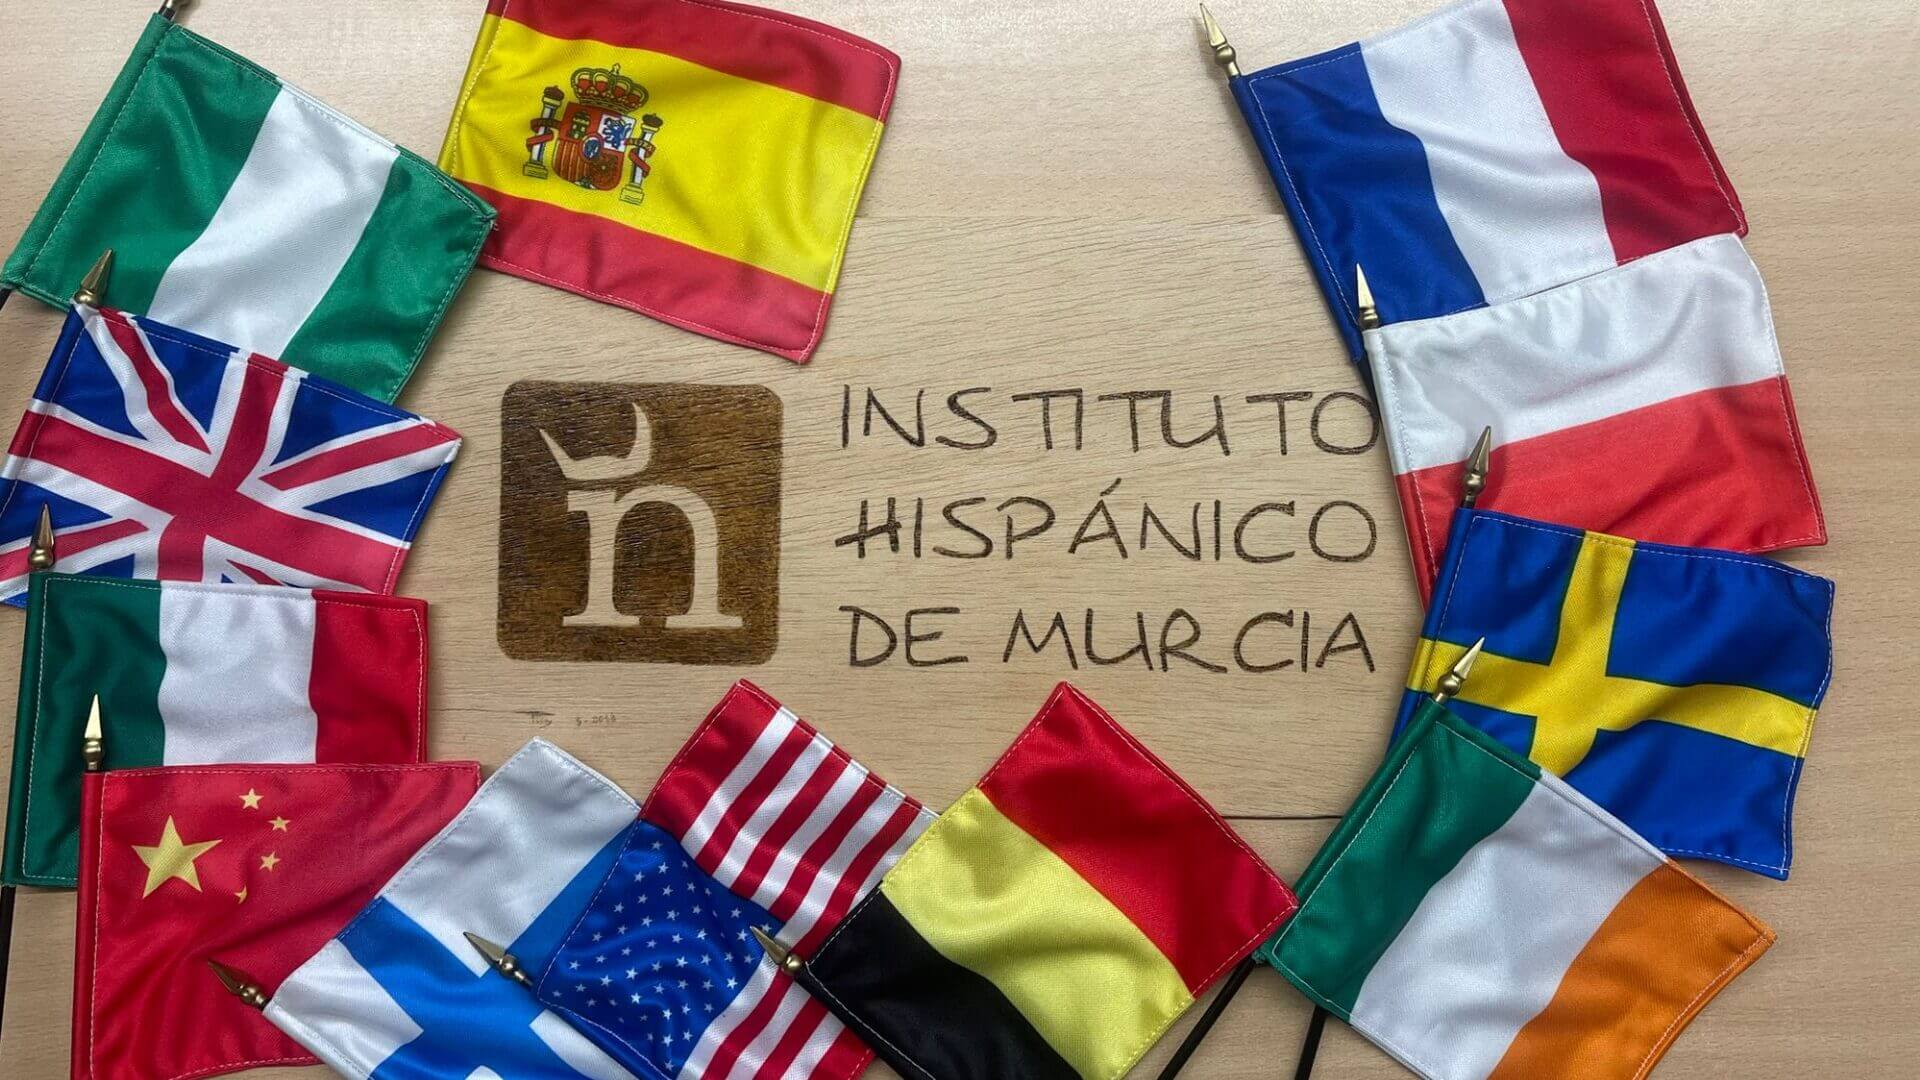 Instituto Hispánico de Murcia - NIE and Nationality: A complete guide to obtain it